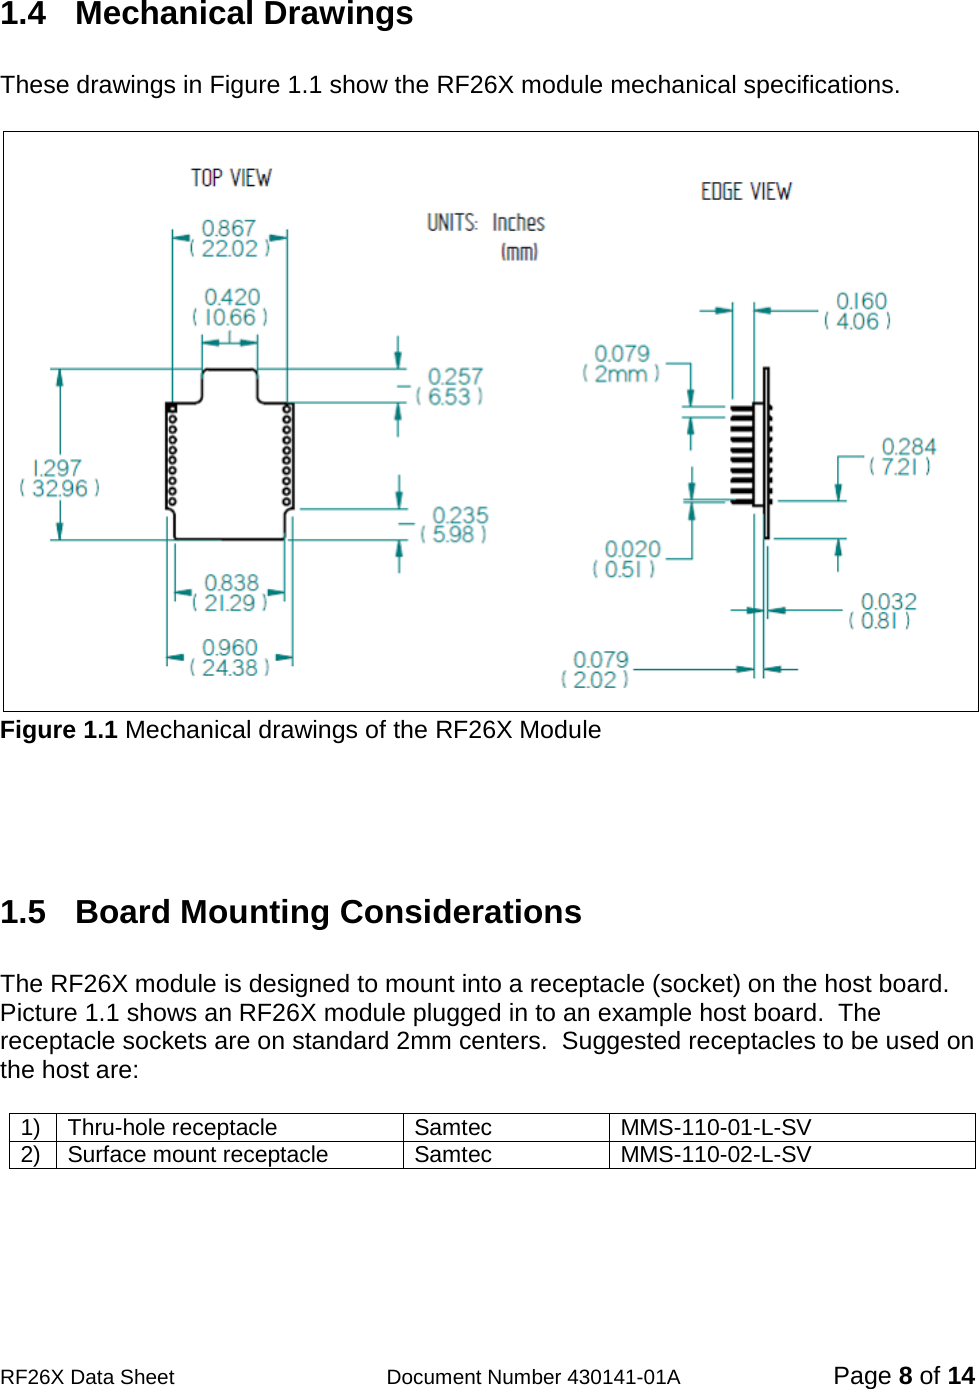                                            RF26X Data Sheet                  Document Number 430141-01A  Page 8 of 14  1.4   Mechanical Drawings    These drawings in Figure 1.1 show the RF26X module mechanical specifications.   Figure 1.1 Mechanical drawings of the RF26X Module     1.5  Board Mounting Considerations  The RF26X module is designed to mount into a receptacle (socket) on the host board.  Picture 1.1 shows an RF26X module plugged in to an example host board.  The receptacle sockets are on standard 2mm centers.  Suggested receptacles to be used on the host are:  1) Thru-hole receptacle Samtec MMS-110-01-L-SV   2) Surface mount receptacle Samtec MMS-110-02-L-SV     